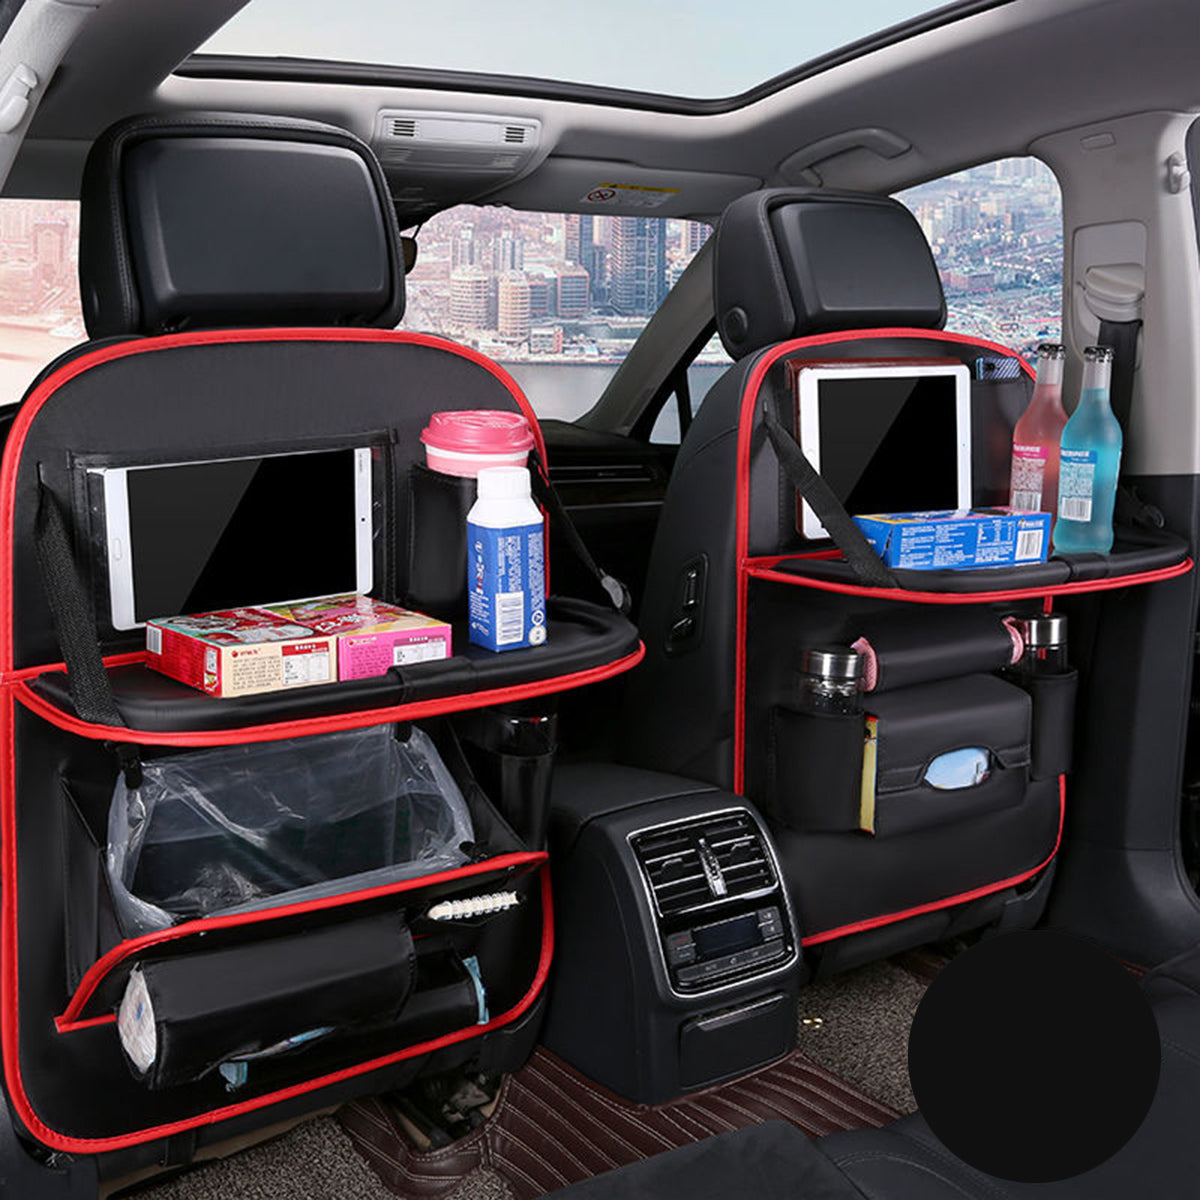 Backseat Organizer With Tablet Holder PU Leather, Custom Fit For Your Cars, Backseat Car Organizer, Car Seat Back Protectors Kick With Foldable Table Tray Car Seat Organizer, Car Accessories LE15987